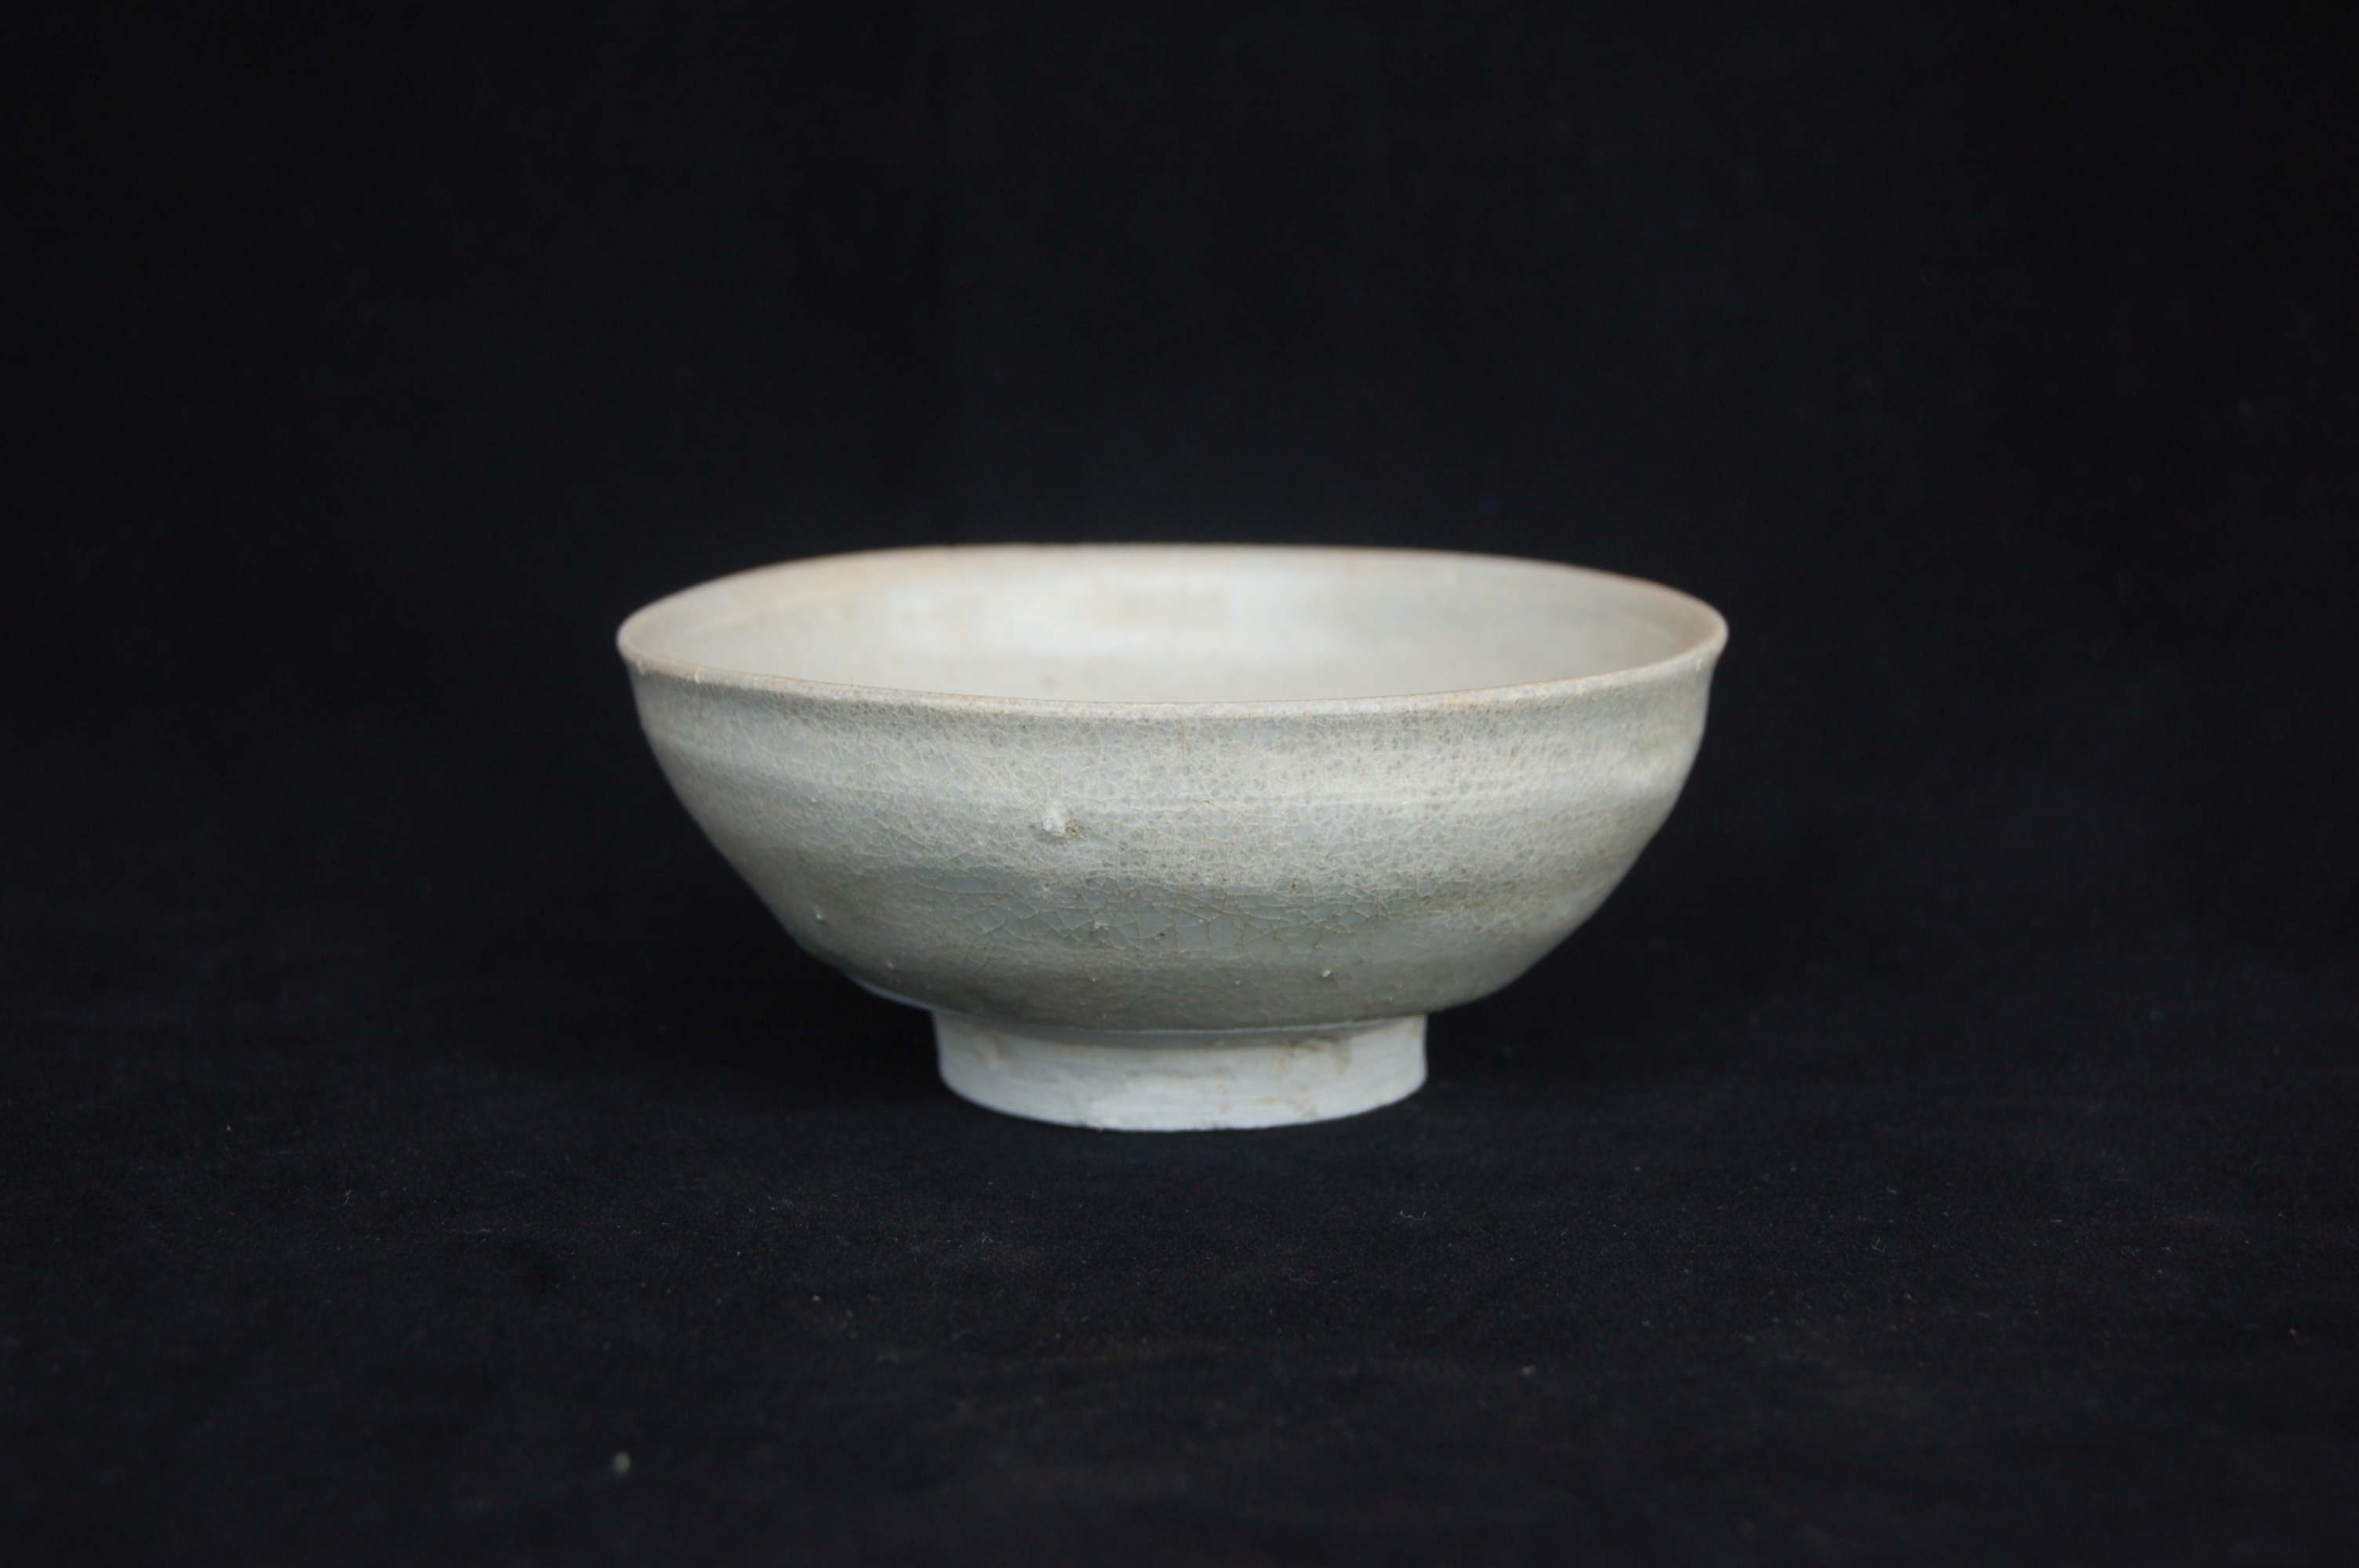 Small plain bowl with a slightly everted rim, round wall and a carved foot-ring. Diameter 12 cm, height 5 cm.